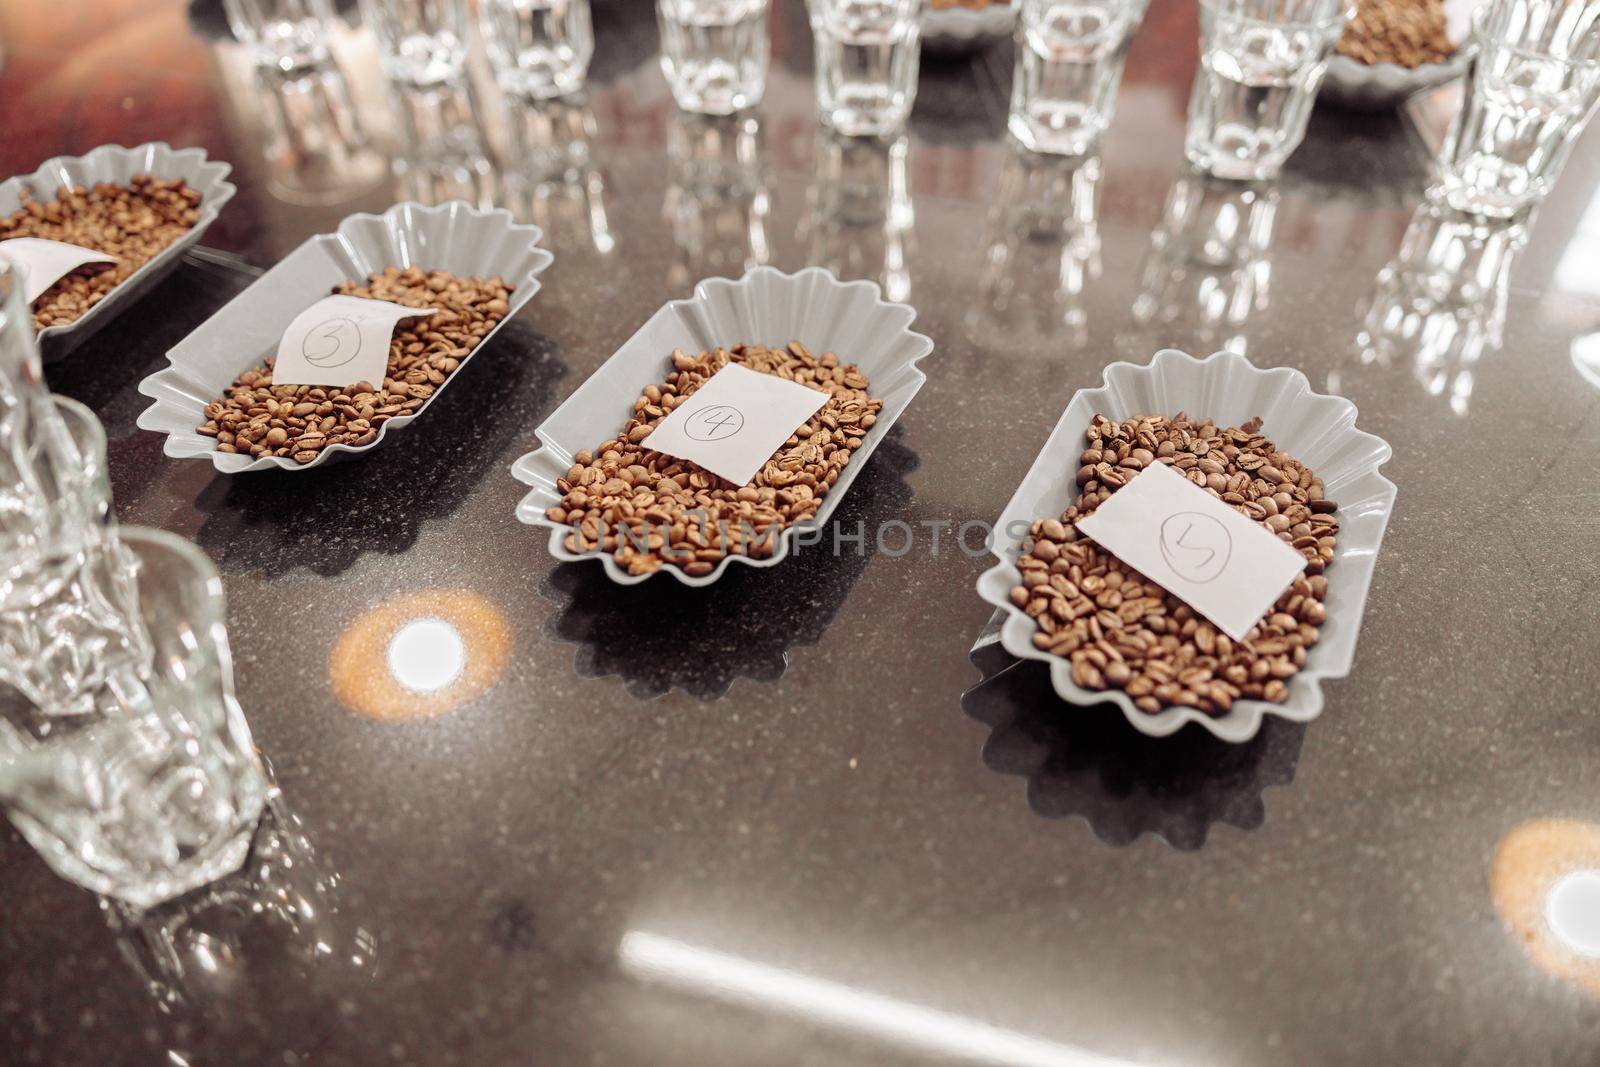 Top view of empty water glasses and bowls with coffee beans and notes on the table for tasting